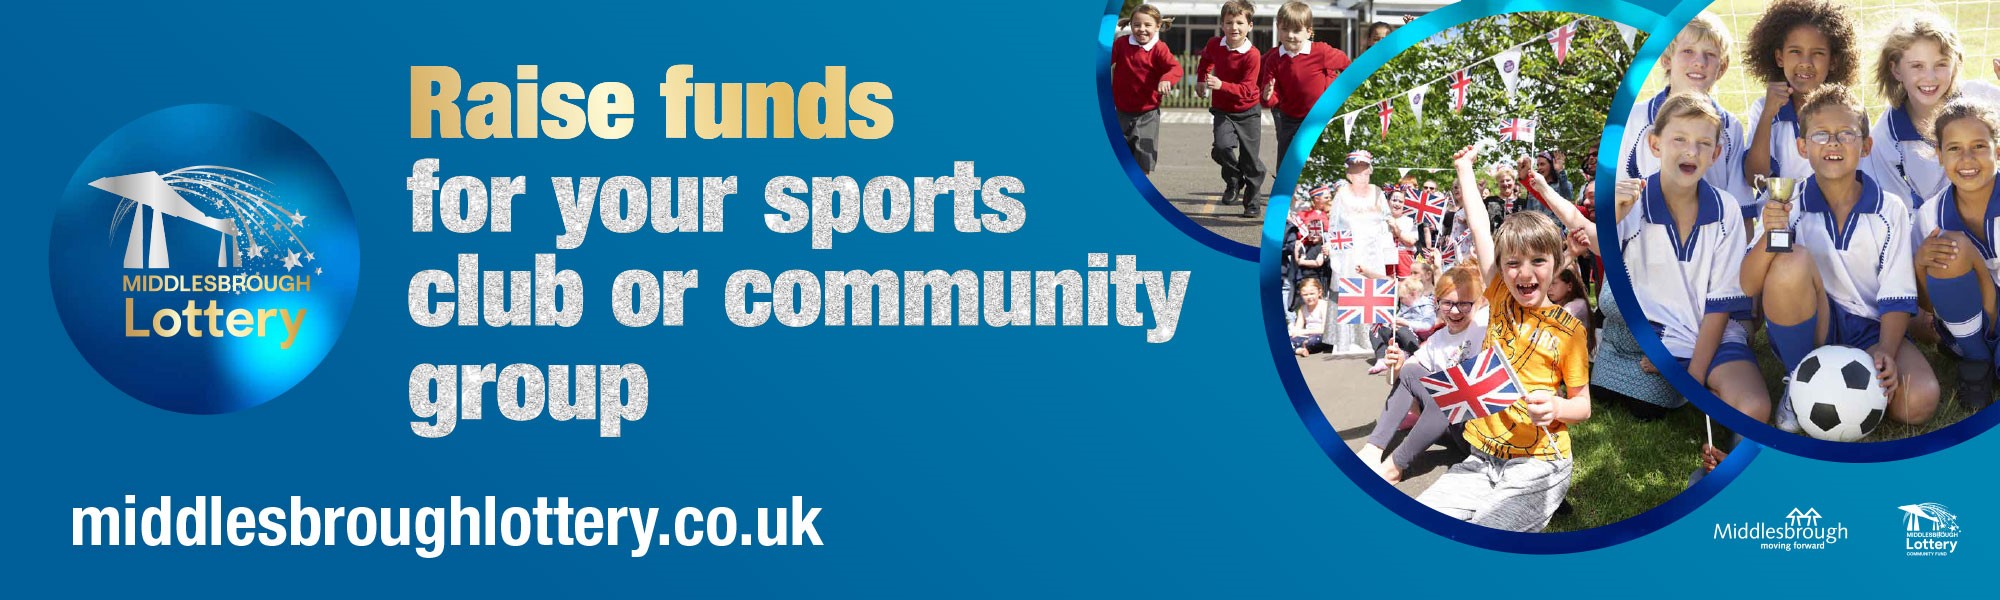 Raise funds for your sports clubs or community group! Play the Middlesbrough Lottery